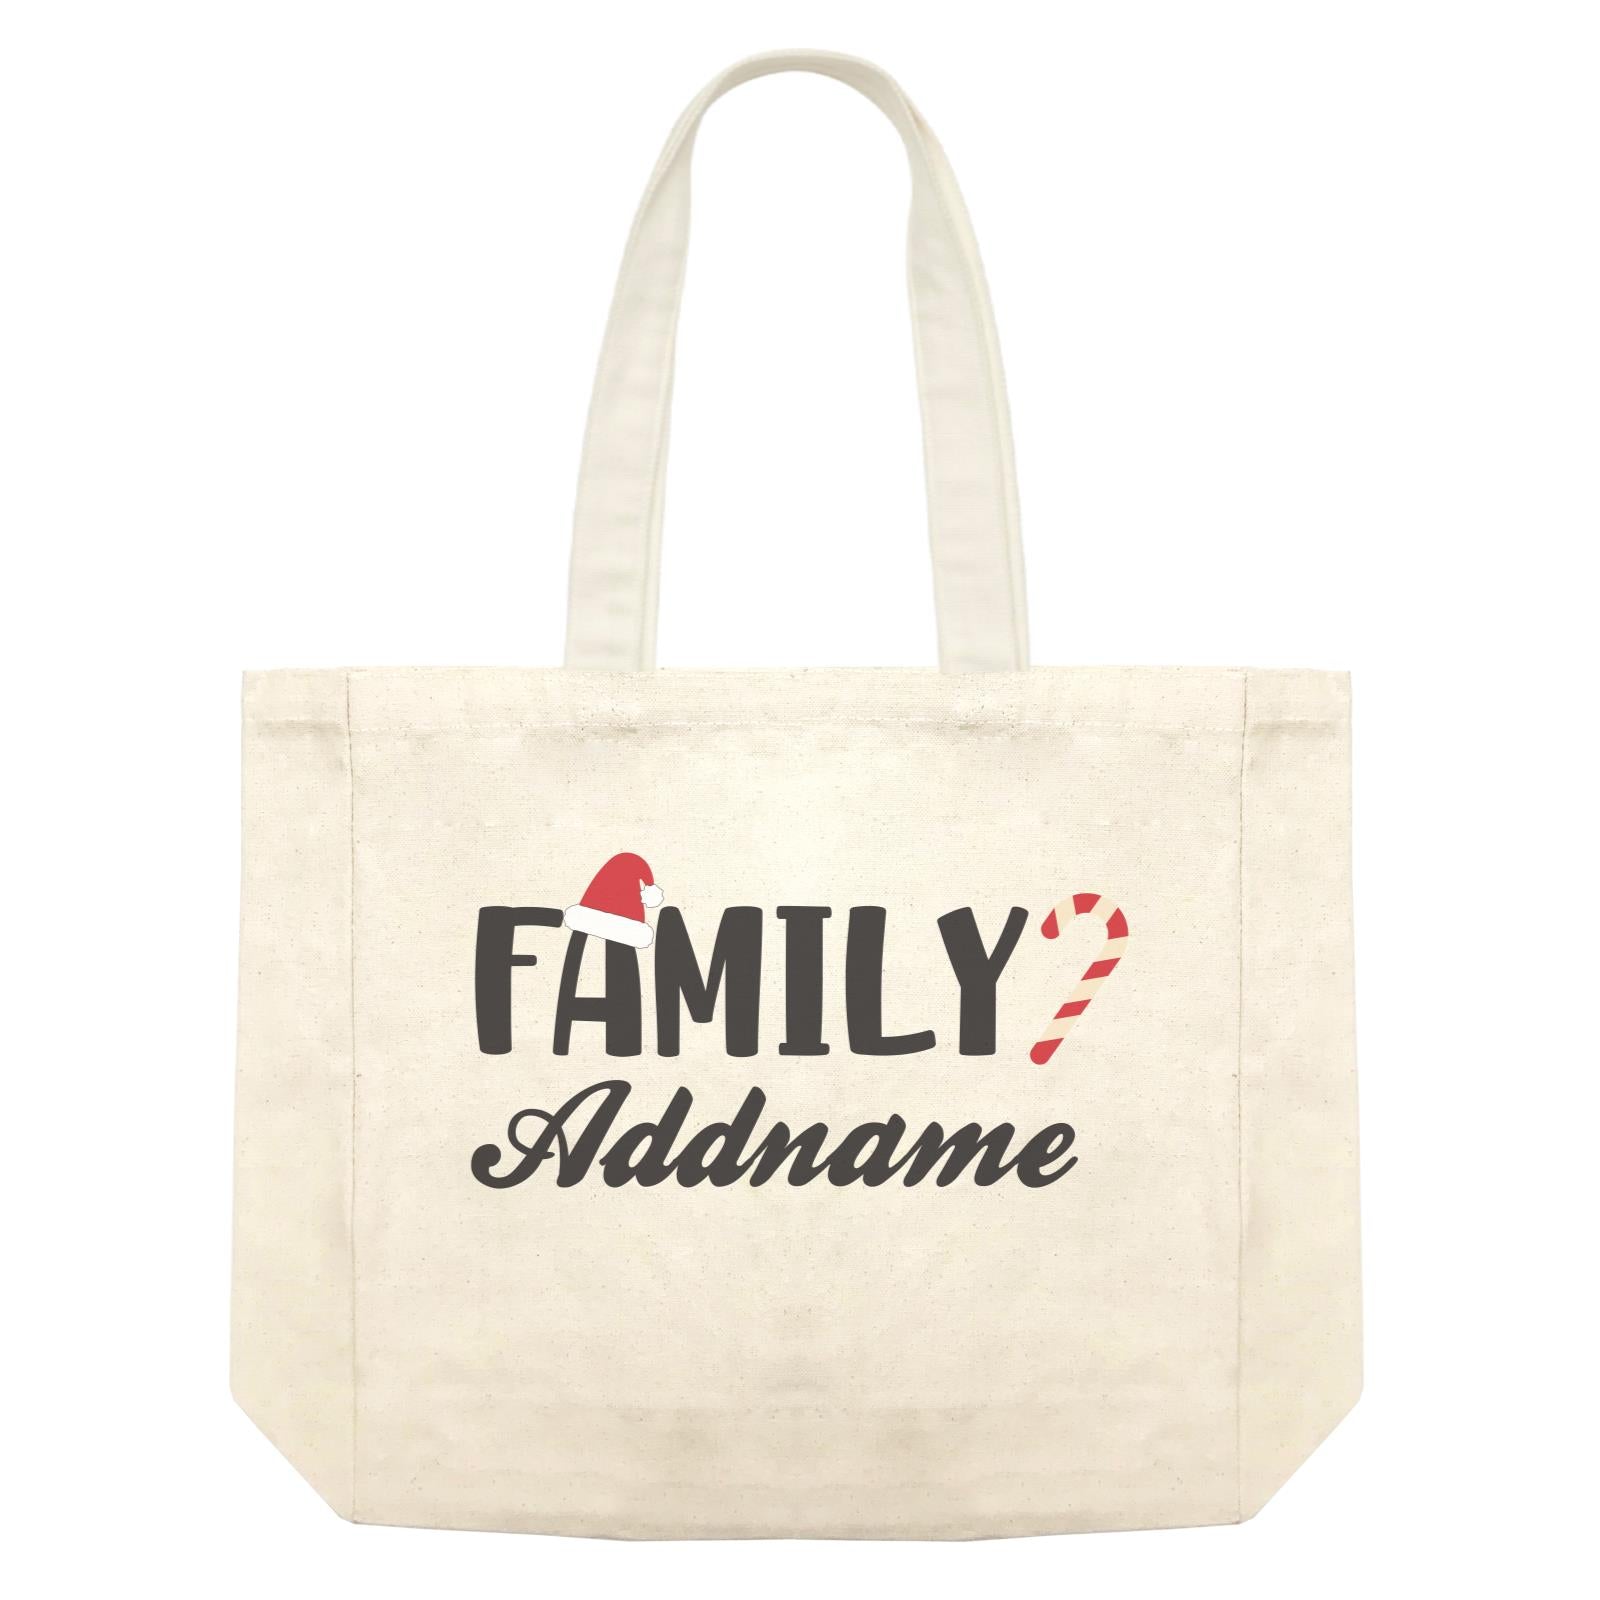 Christmas Series Family Addname with Santa Hat and Candy Cane Shopping Bag